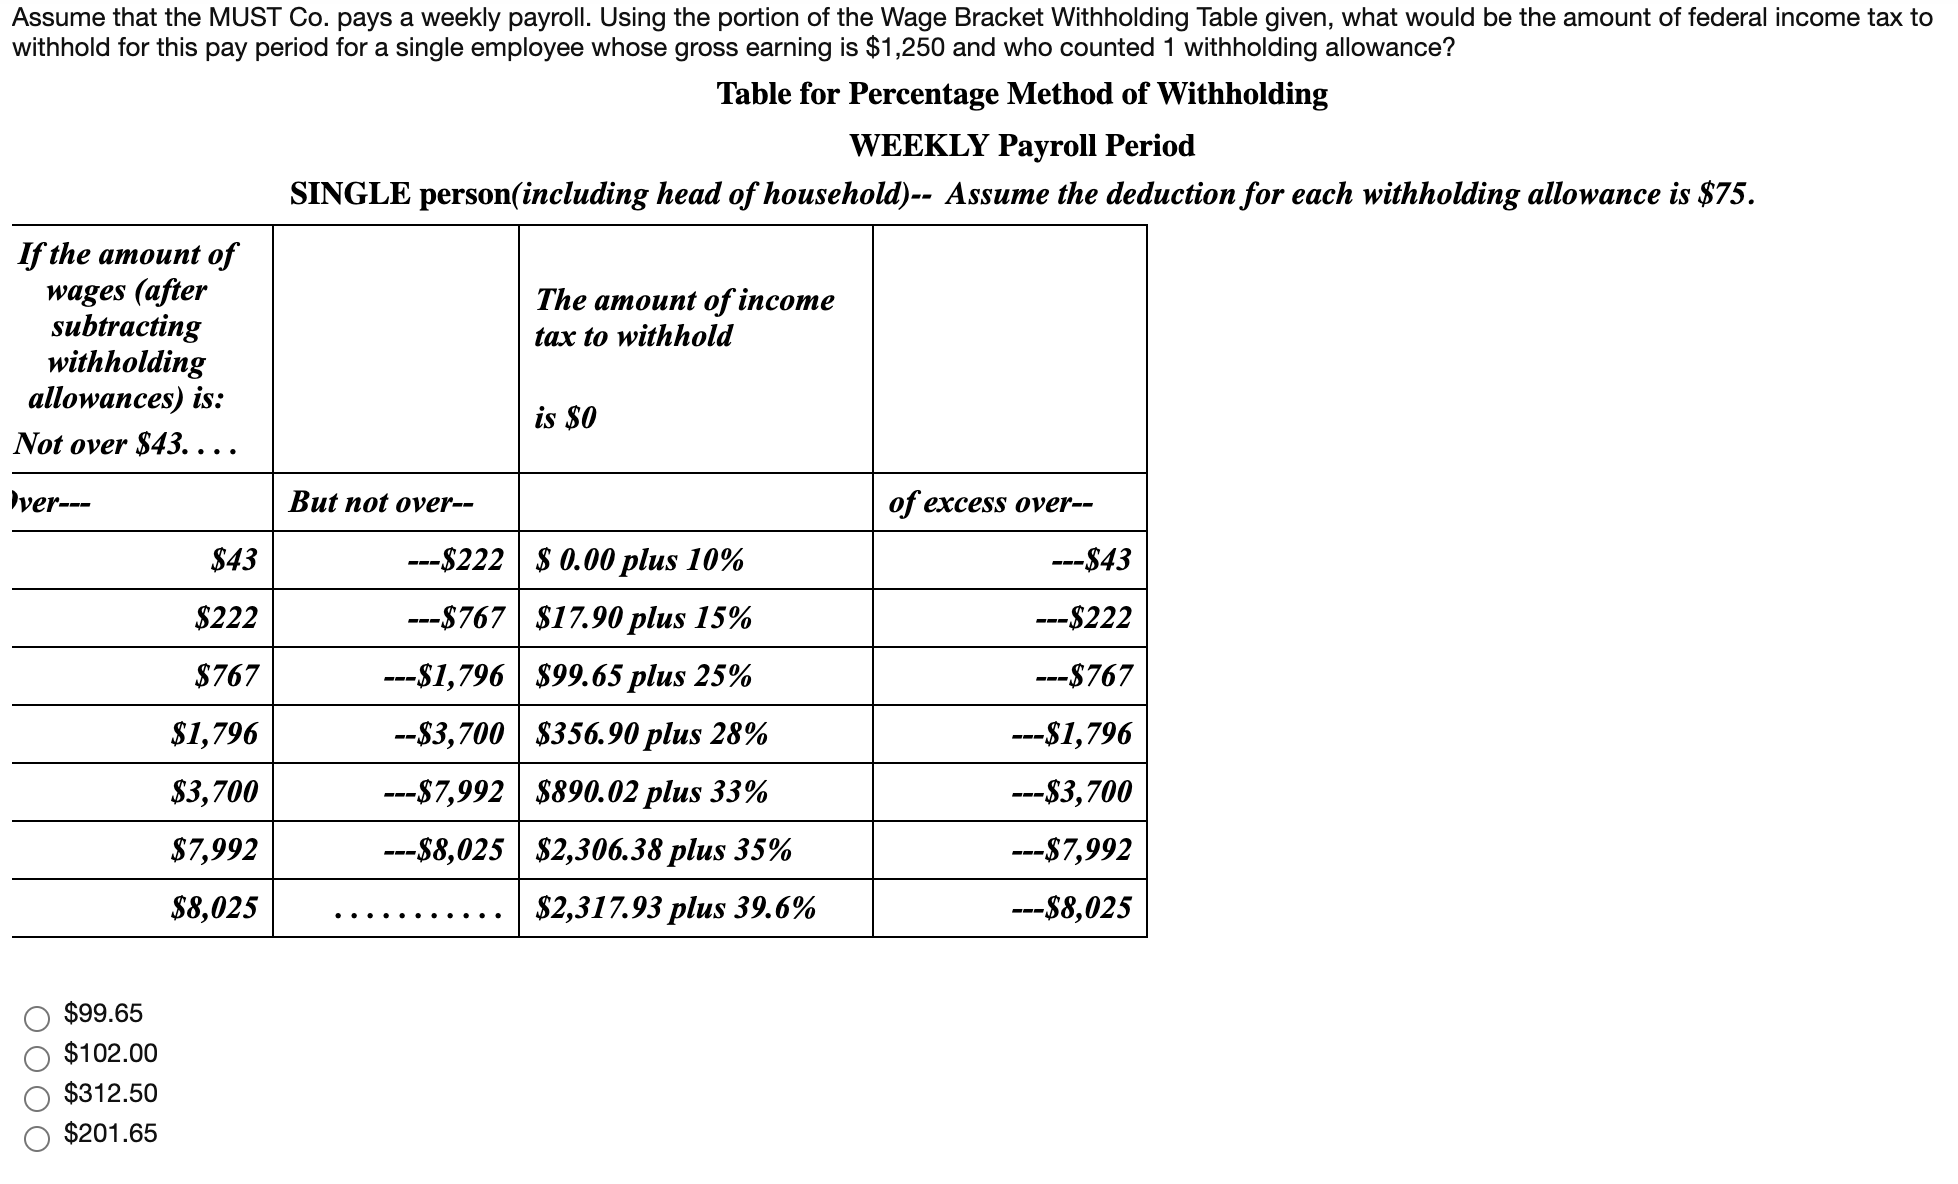 Assume that the MUST Co. pays a weekly payroll. Using the portion of the Wage Bracket Withholding Table given, what would be the amount of federal income tax to
withhold for this pay period for a single employee whose gross earning is $1,250 and who counted 1 withholding allowance?
Table for Percentage Method of Withholding
WEEKLY Payroll Period
SINGLE person(including head of household)-- Assume the deduction for each withholding allowance is $75.
If the amount of
wages (after
subtracting
withholding
allowances) is:
The amount of income
tax to withhold
is $0
Not over $43. ...
ver---
But not over--
of excess over--
$43
--$222 | $ 0.00 plus 10%
---$43
$222
---$767 $17.90 plus 15%
--$222
$767
--$1,796 | $99.65 plus 25%
---$767
$1,796
--$3,700 | $356.90 plus 28%
--$1,796
---
$3,700
---$7,992 | $890.02 plus 33%
--$3,700
---
$7,992
---$8,025 | $2,306.38 plus 35%
---$7,992
$8,025
$2,317.93 plus 39.6%
---$8,025
$99.65
$102.00
$312.50
$201.65
